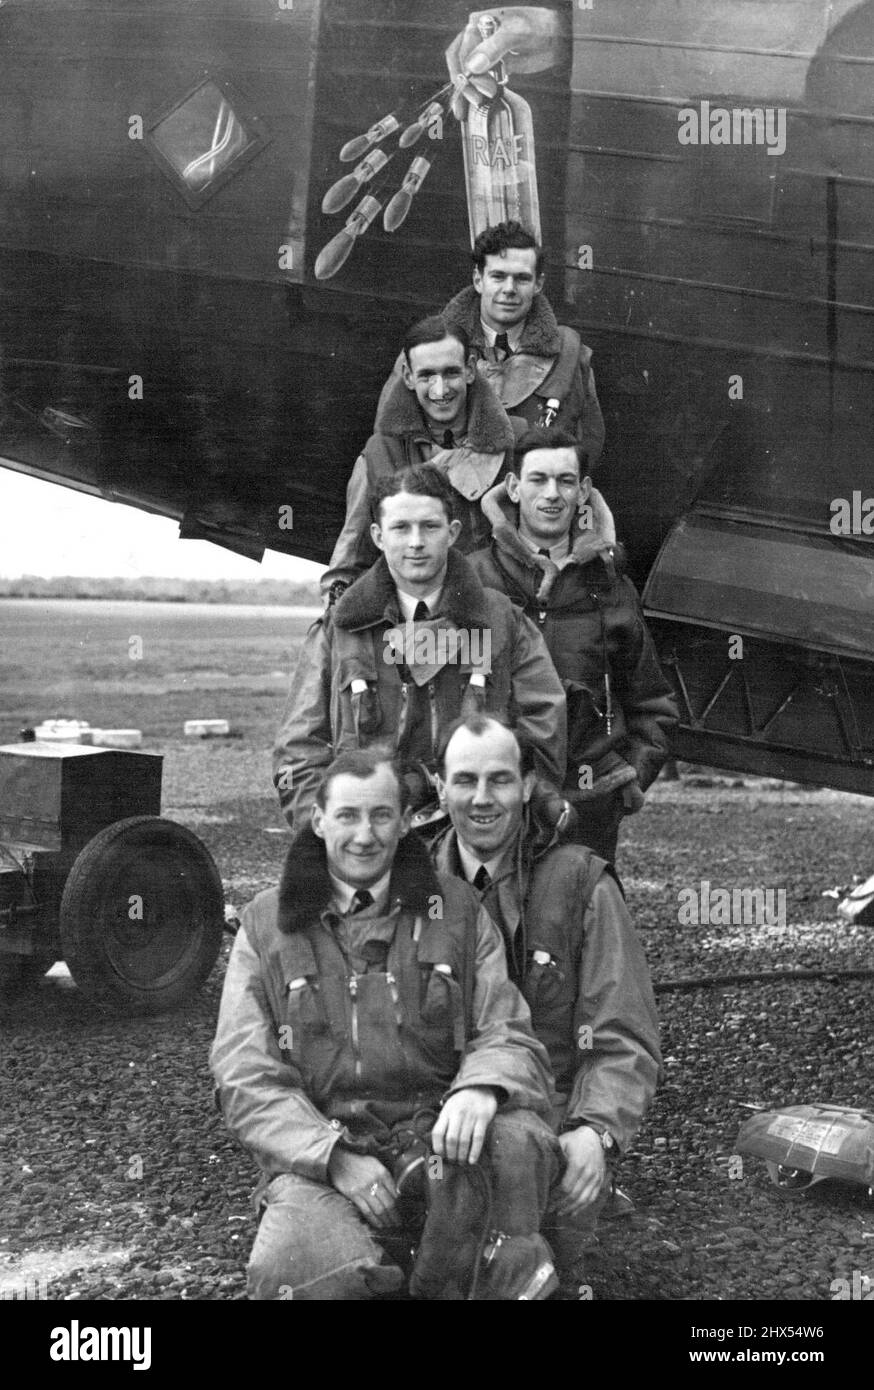 New Zealand Bomber Squadron -- A crew of the New Zealand bomber Squadron with an unofficial crest painted on their aircraft. This Wellington bomber squadron, which is manned by New Zealanders has made many raids on Germany and occupied territory. August 04, 1941. (Photo by British Official Photograph) Stock Photo